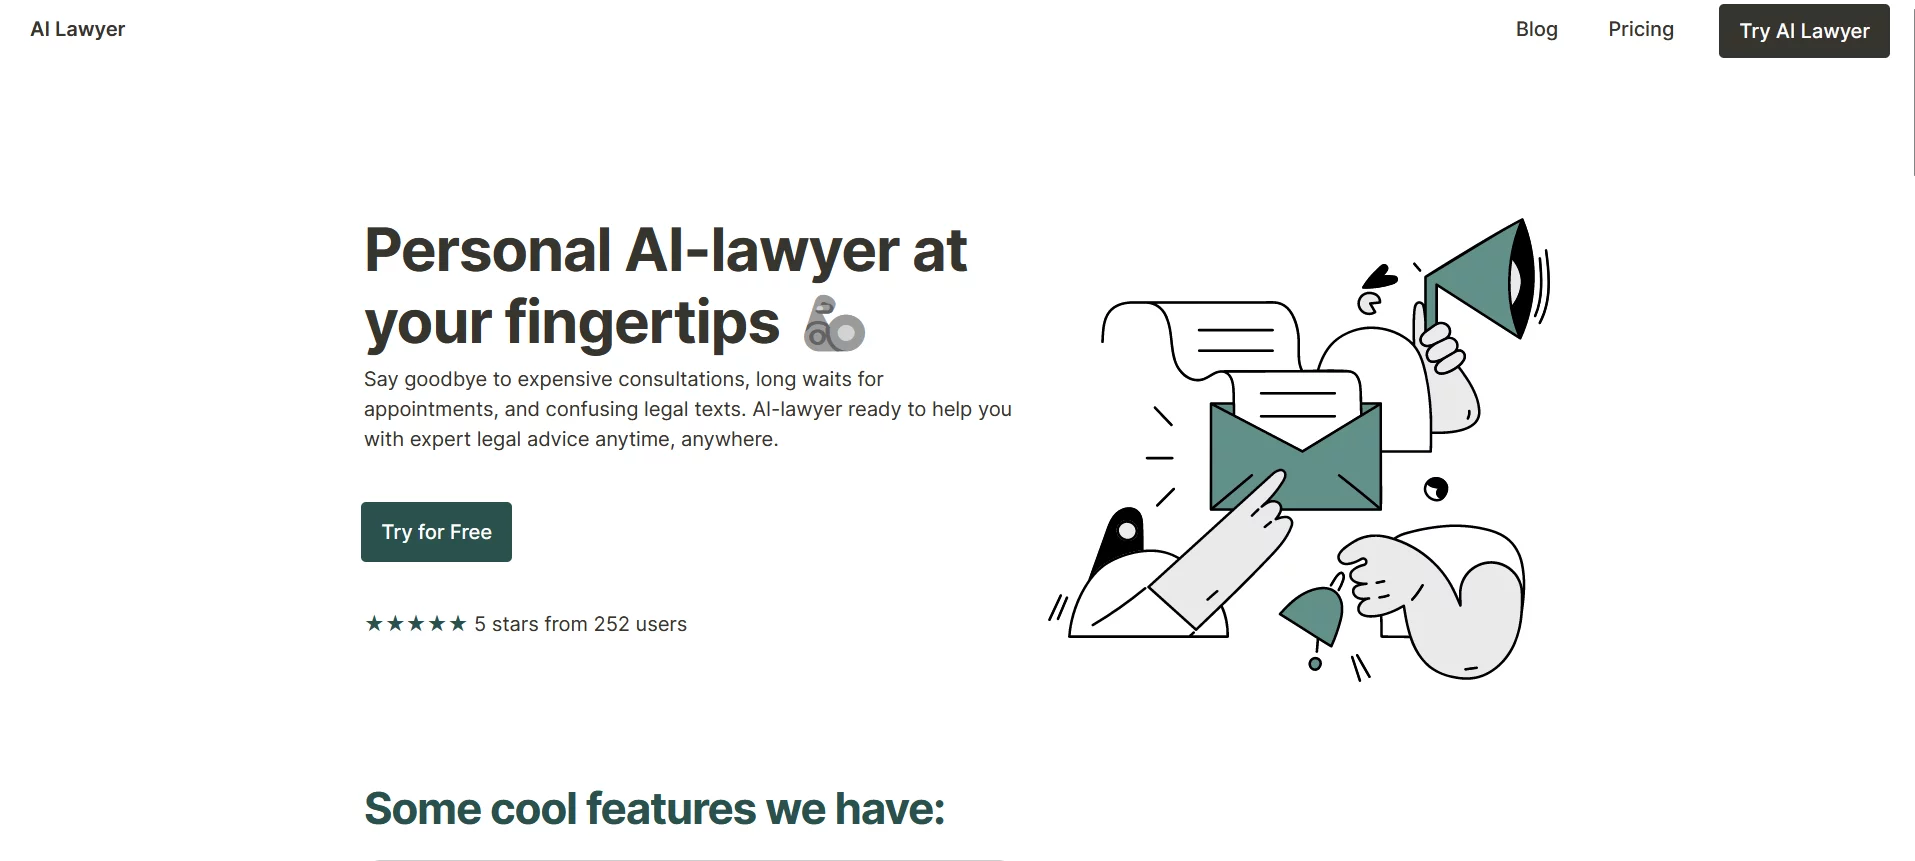  Personal AI-lawyer at your fingertips 